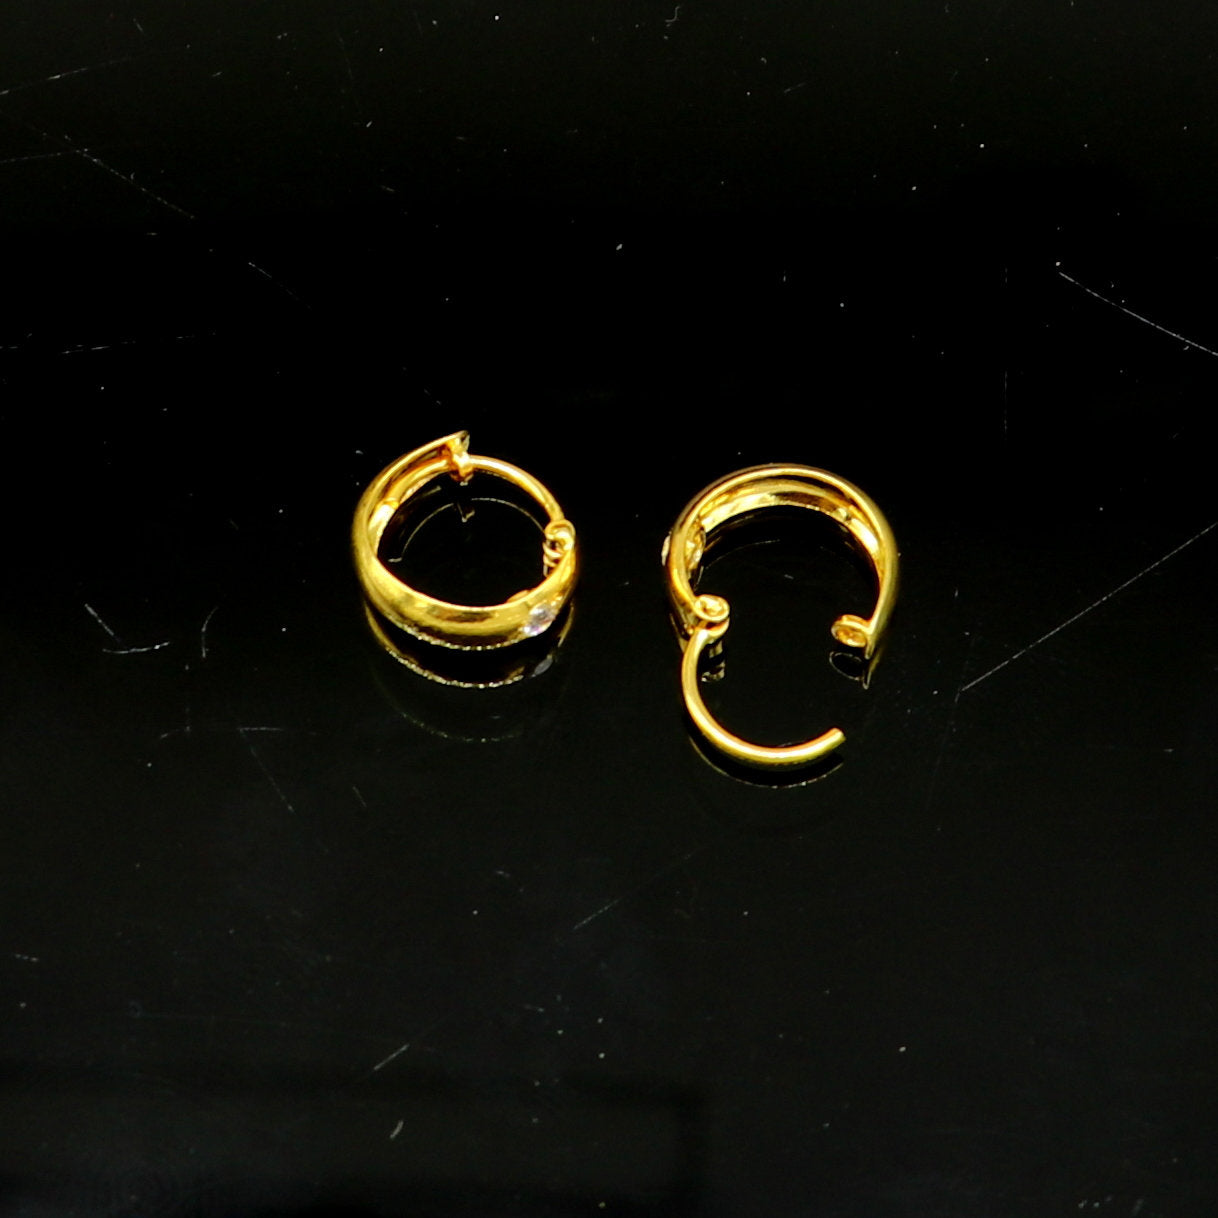 18kt yellow fine gold single stone hoops earring, excellent brides made clip on earring, Huggie Hoop Earrings jewelry gifting ho70 - TRIBAL ORNAMENTS